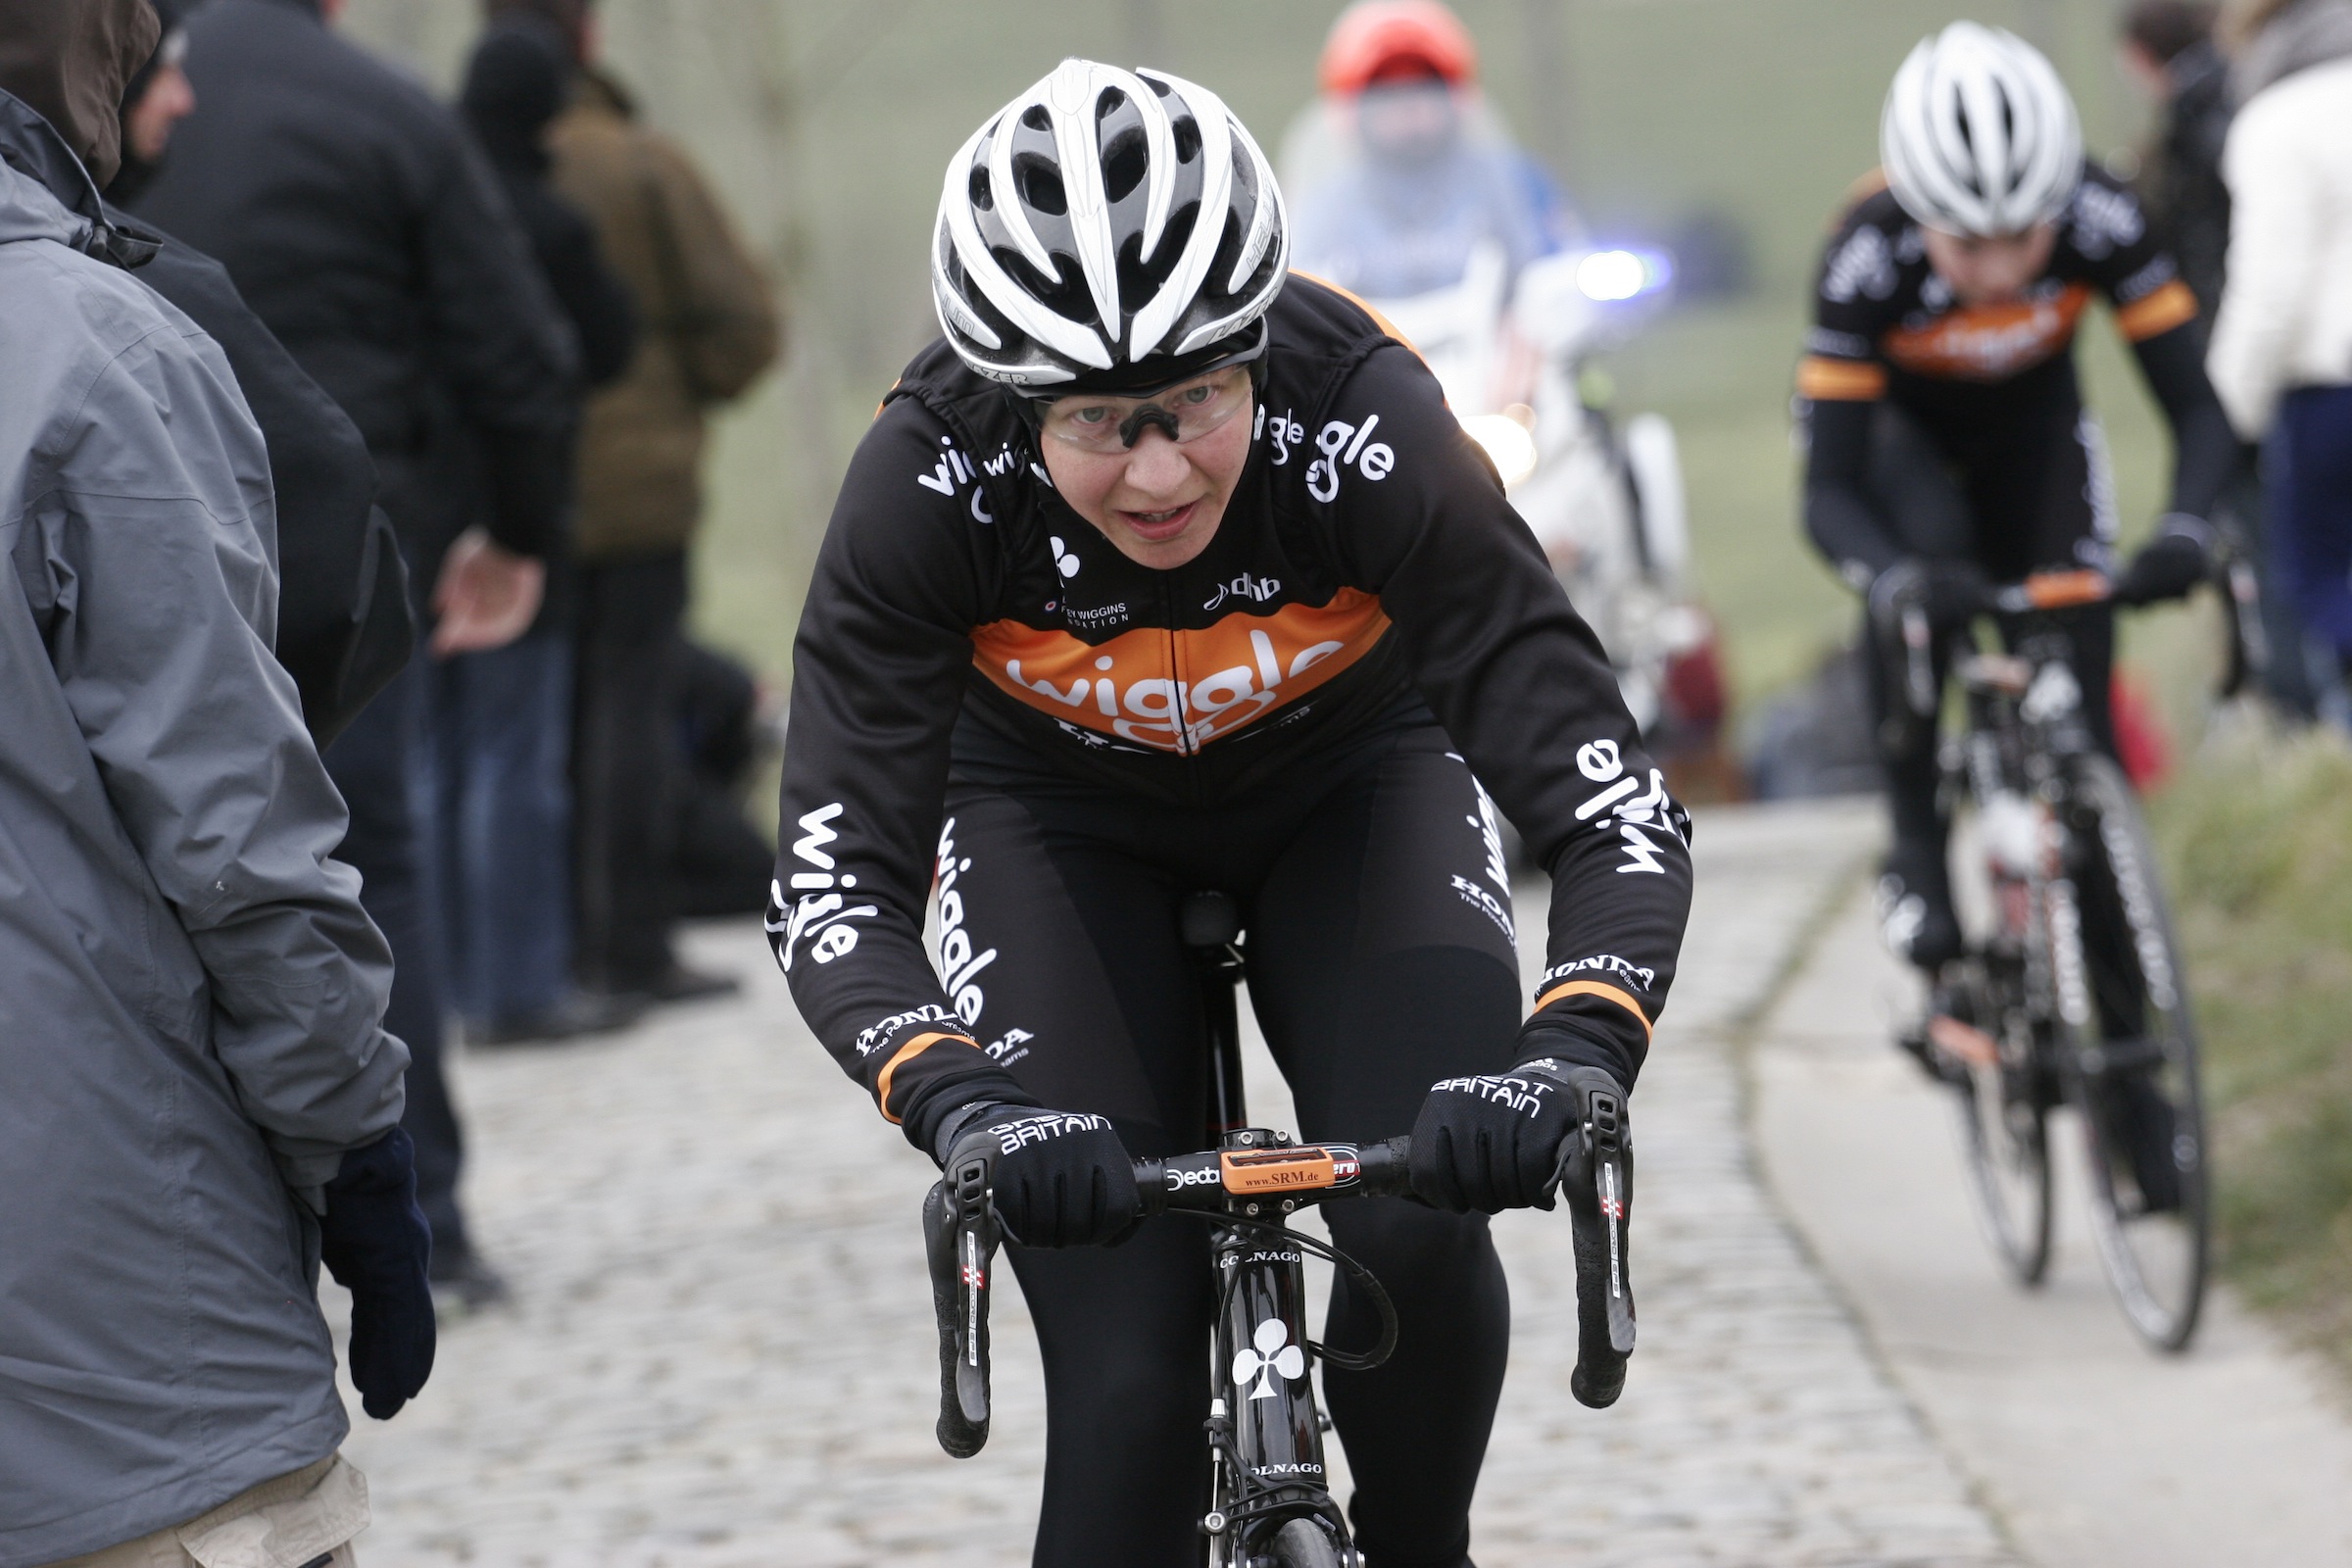 Joanna Rowsell, cobbled Classic, Pic: @Wiggle Honda, submitted by Bart Hazen